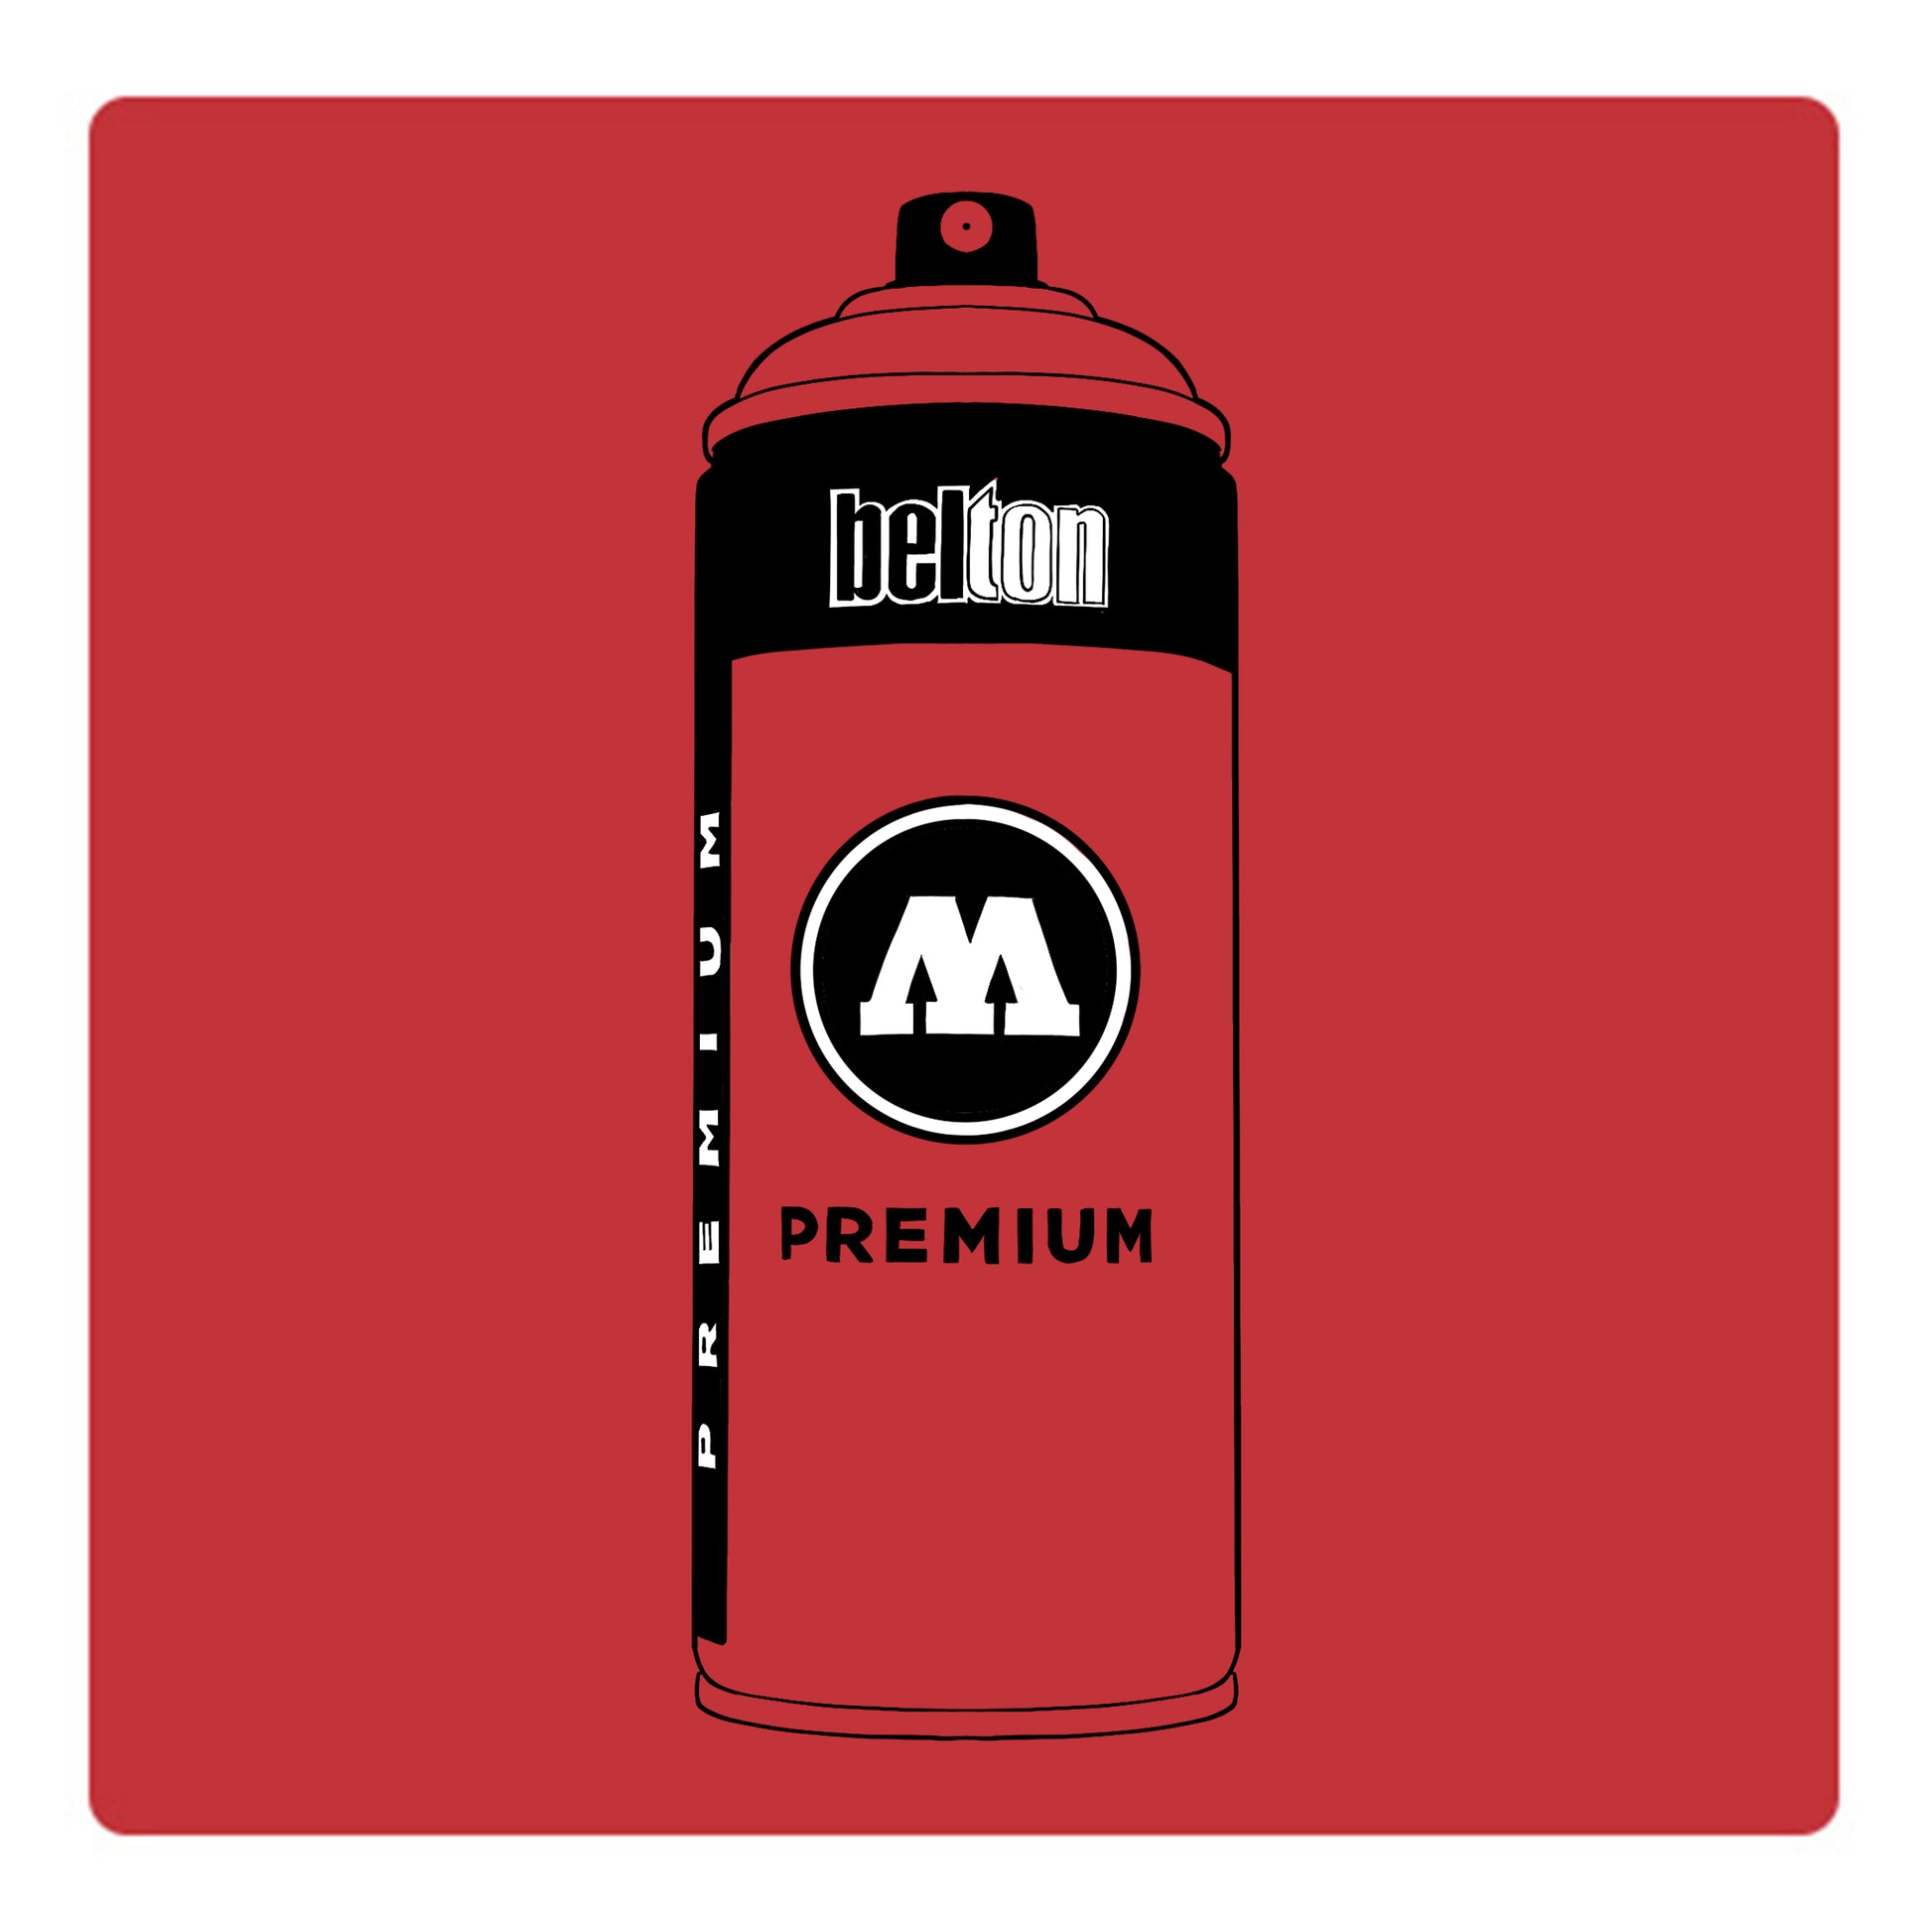 A black outline drawing of a red spray paint can with the words "belton","premium" and the letter"M" written on the face in black and white font. The background is a color swatch of the same red with a white border.